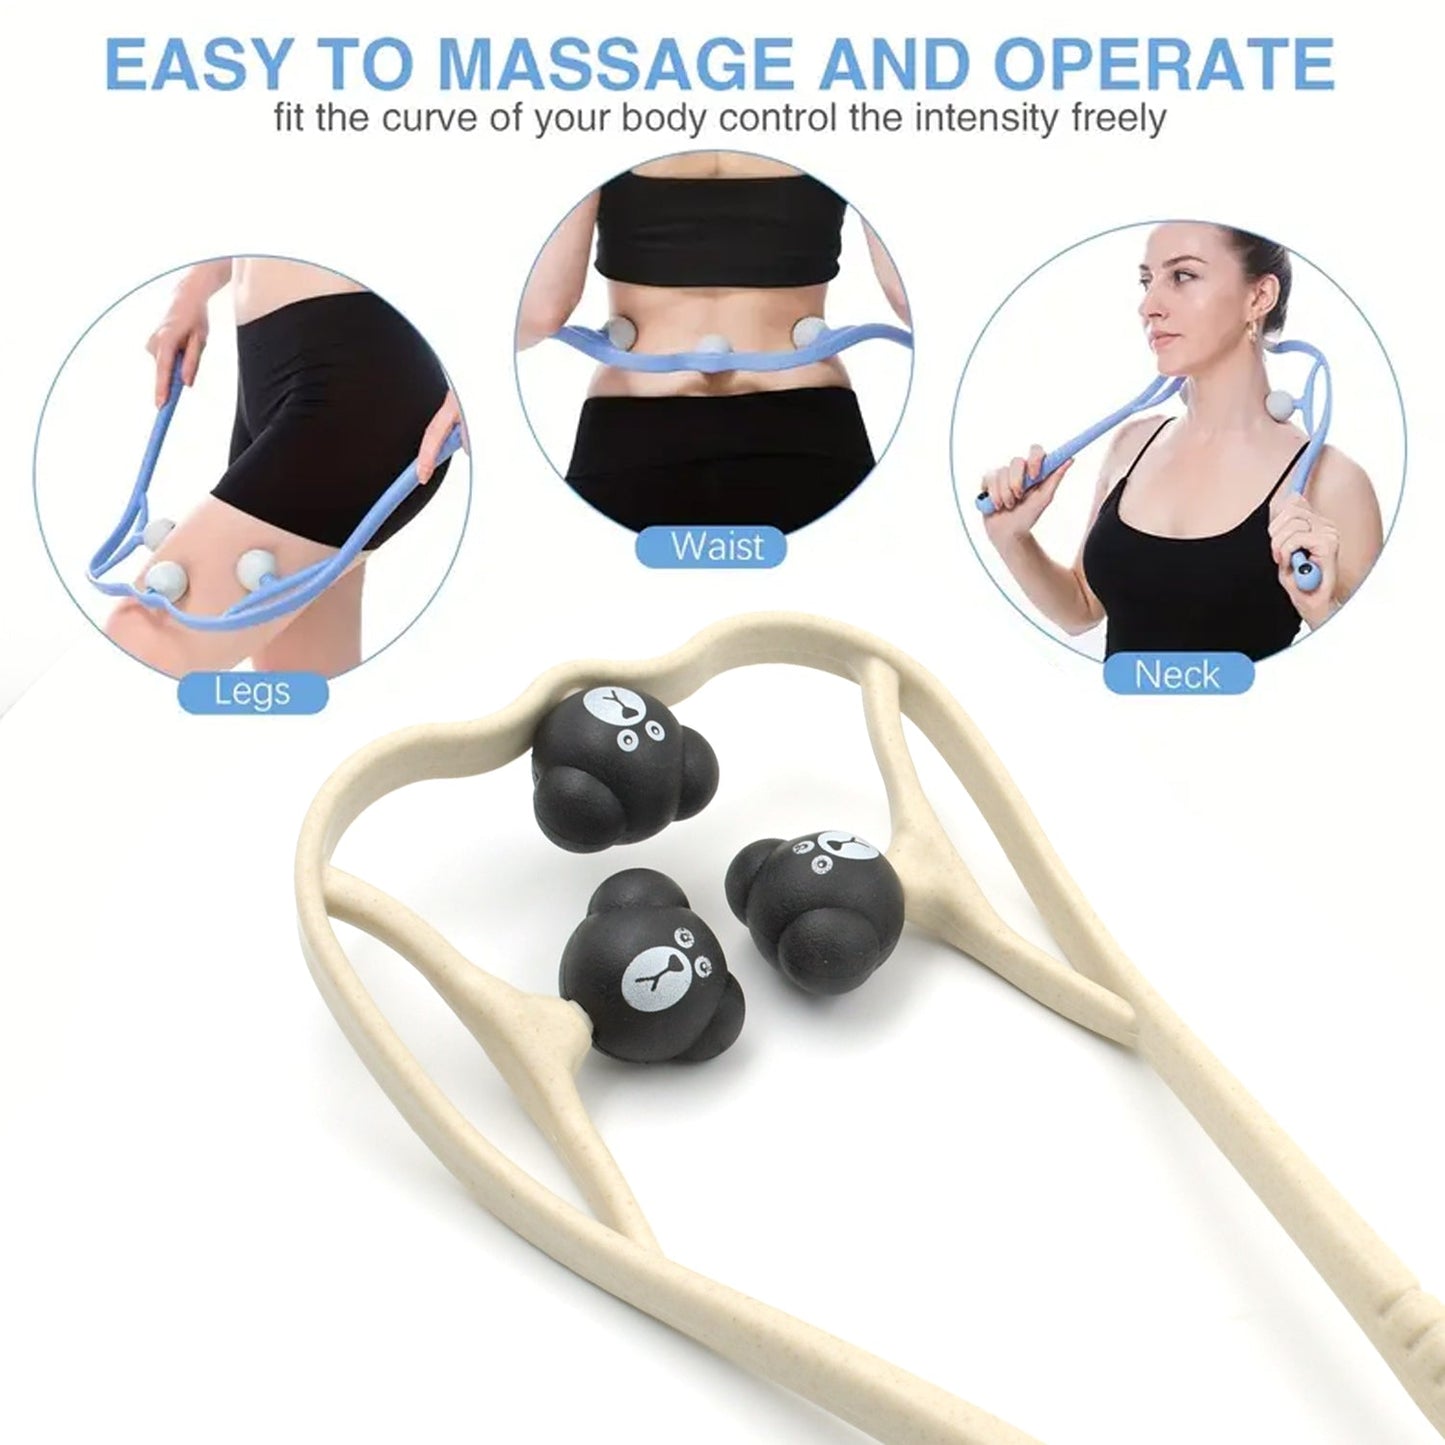 NECK SHOULDER MASSAGER, PORTABLE RELIEVING THE BACK FOR MEN RELIEVING THE WAIST WOMEN & MEN USE